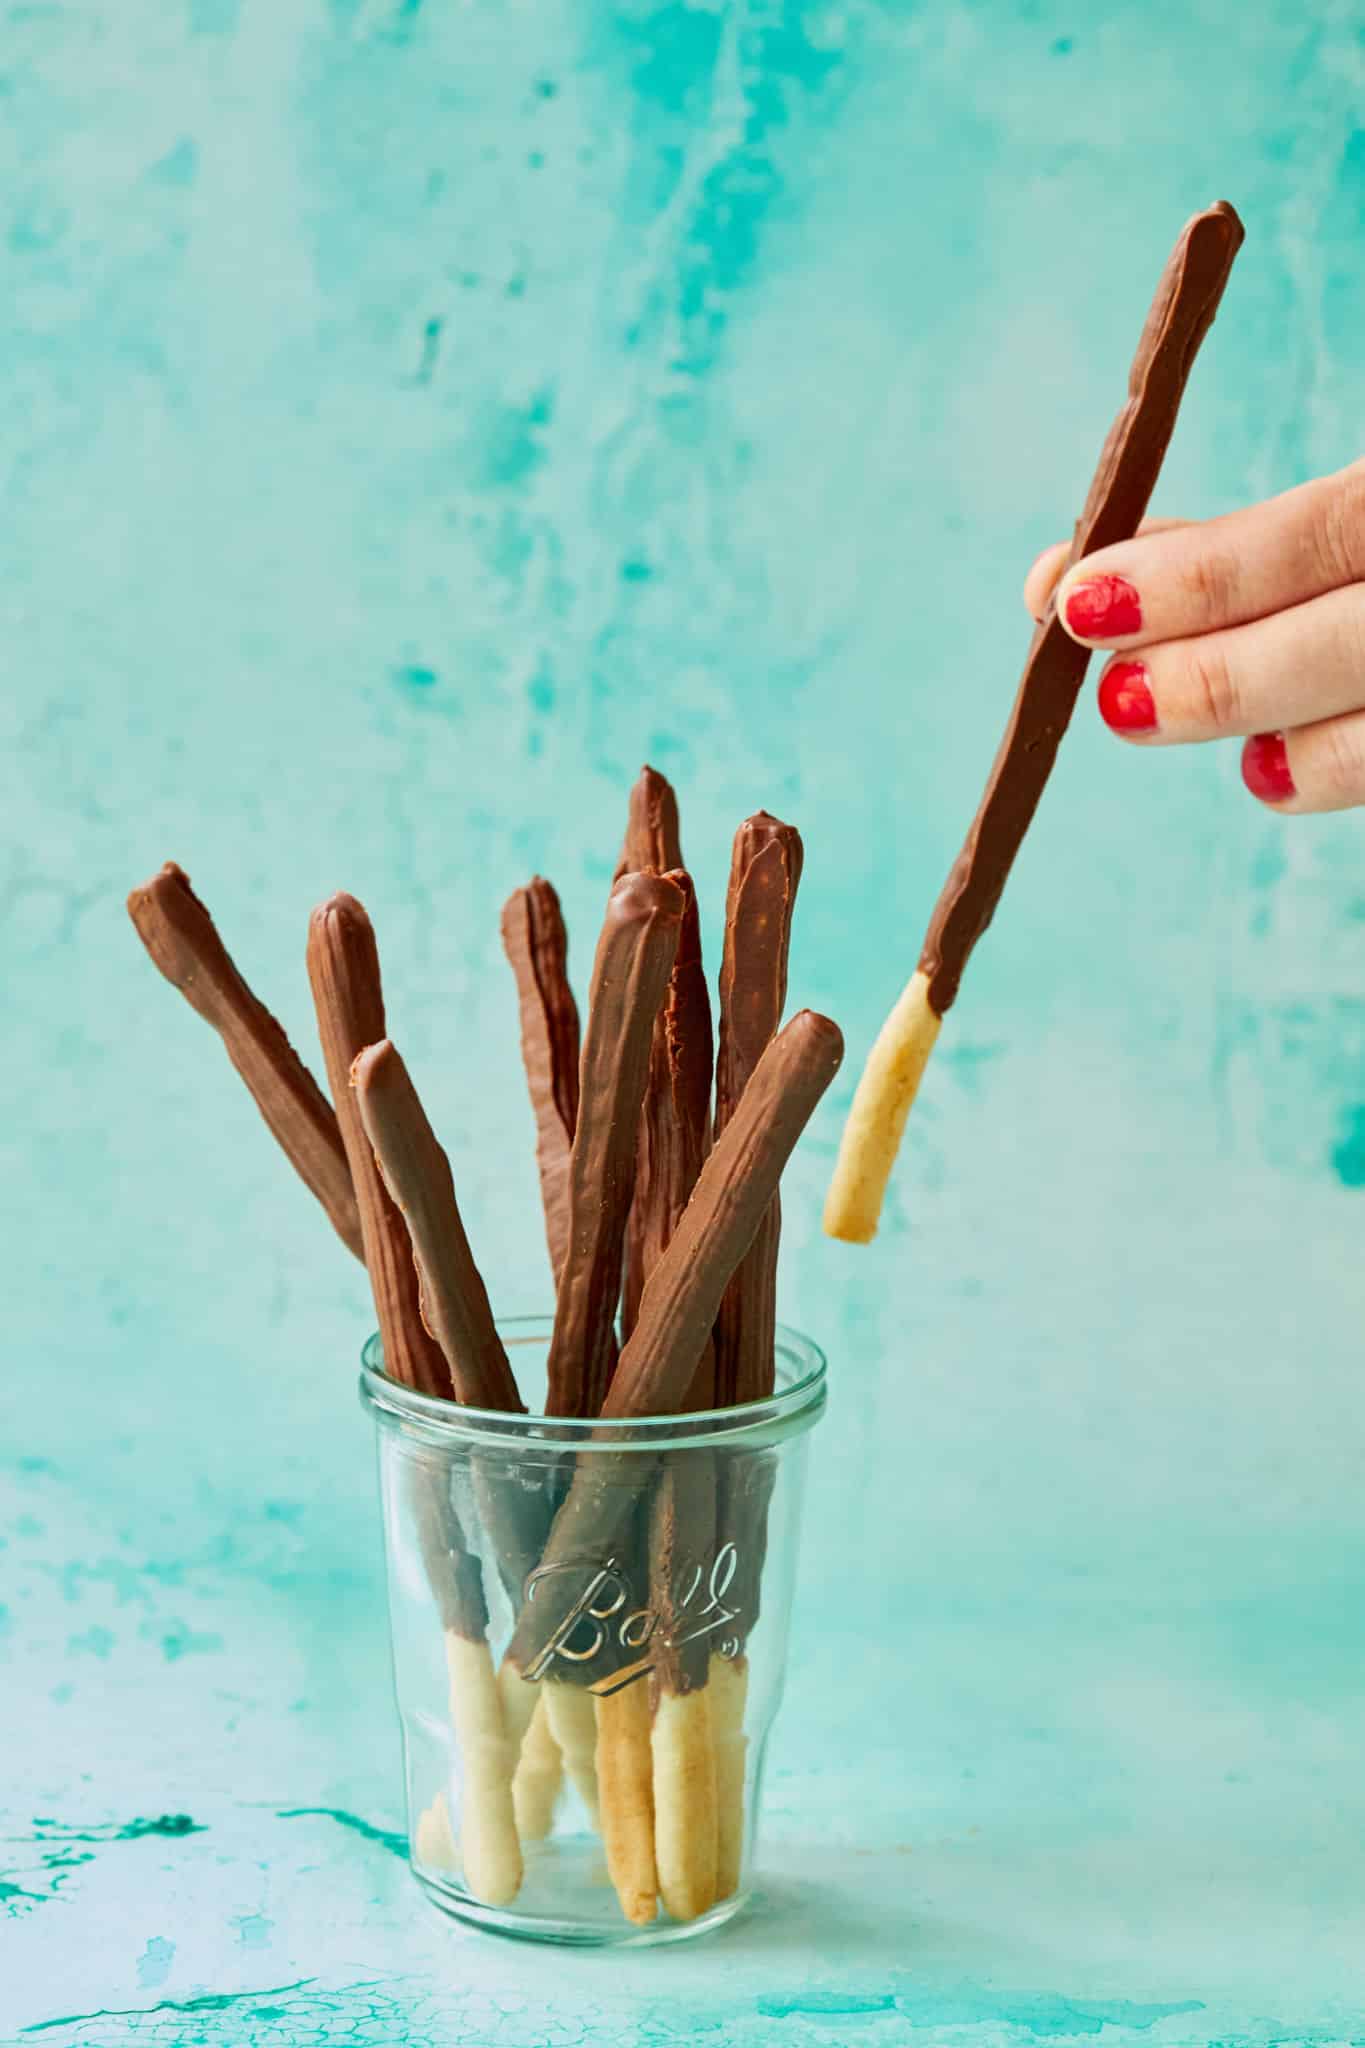 Homemade Pocky sticks are in a thin elongated-stick shape, with most of the stick covered in a chocolate-flavored coating while leaving a small section uncoated for easy handling. The cookies are placed in a glass Ball mason jar with a light teal background. One Pocky biscuit is being taken out of the jar. 